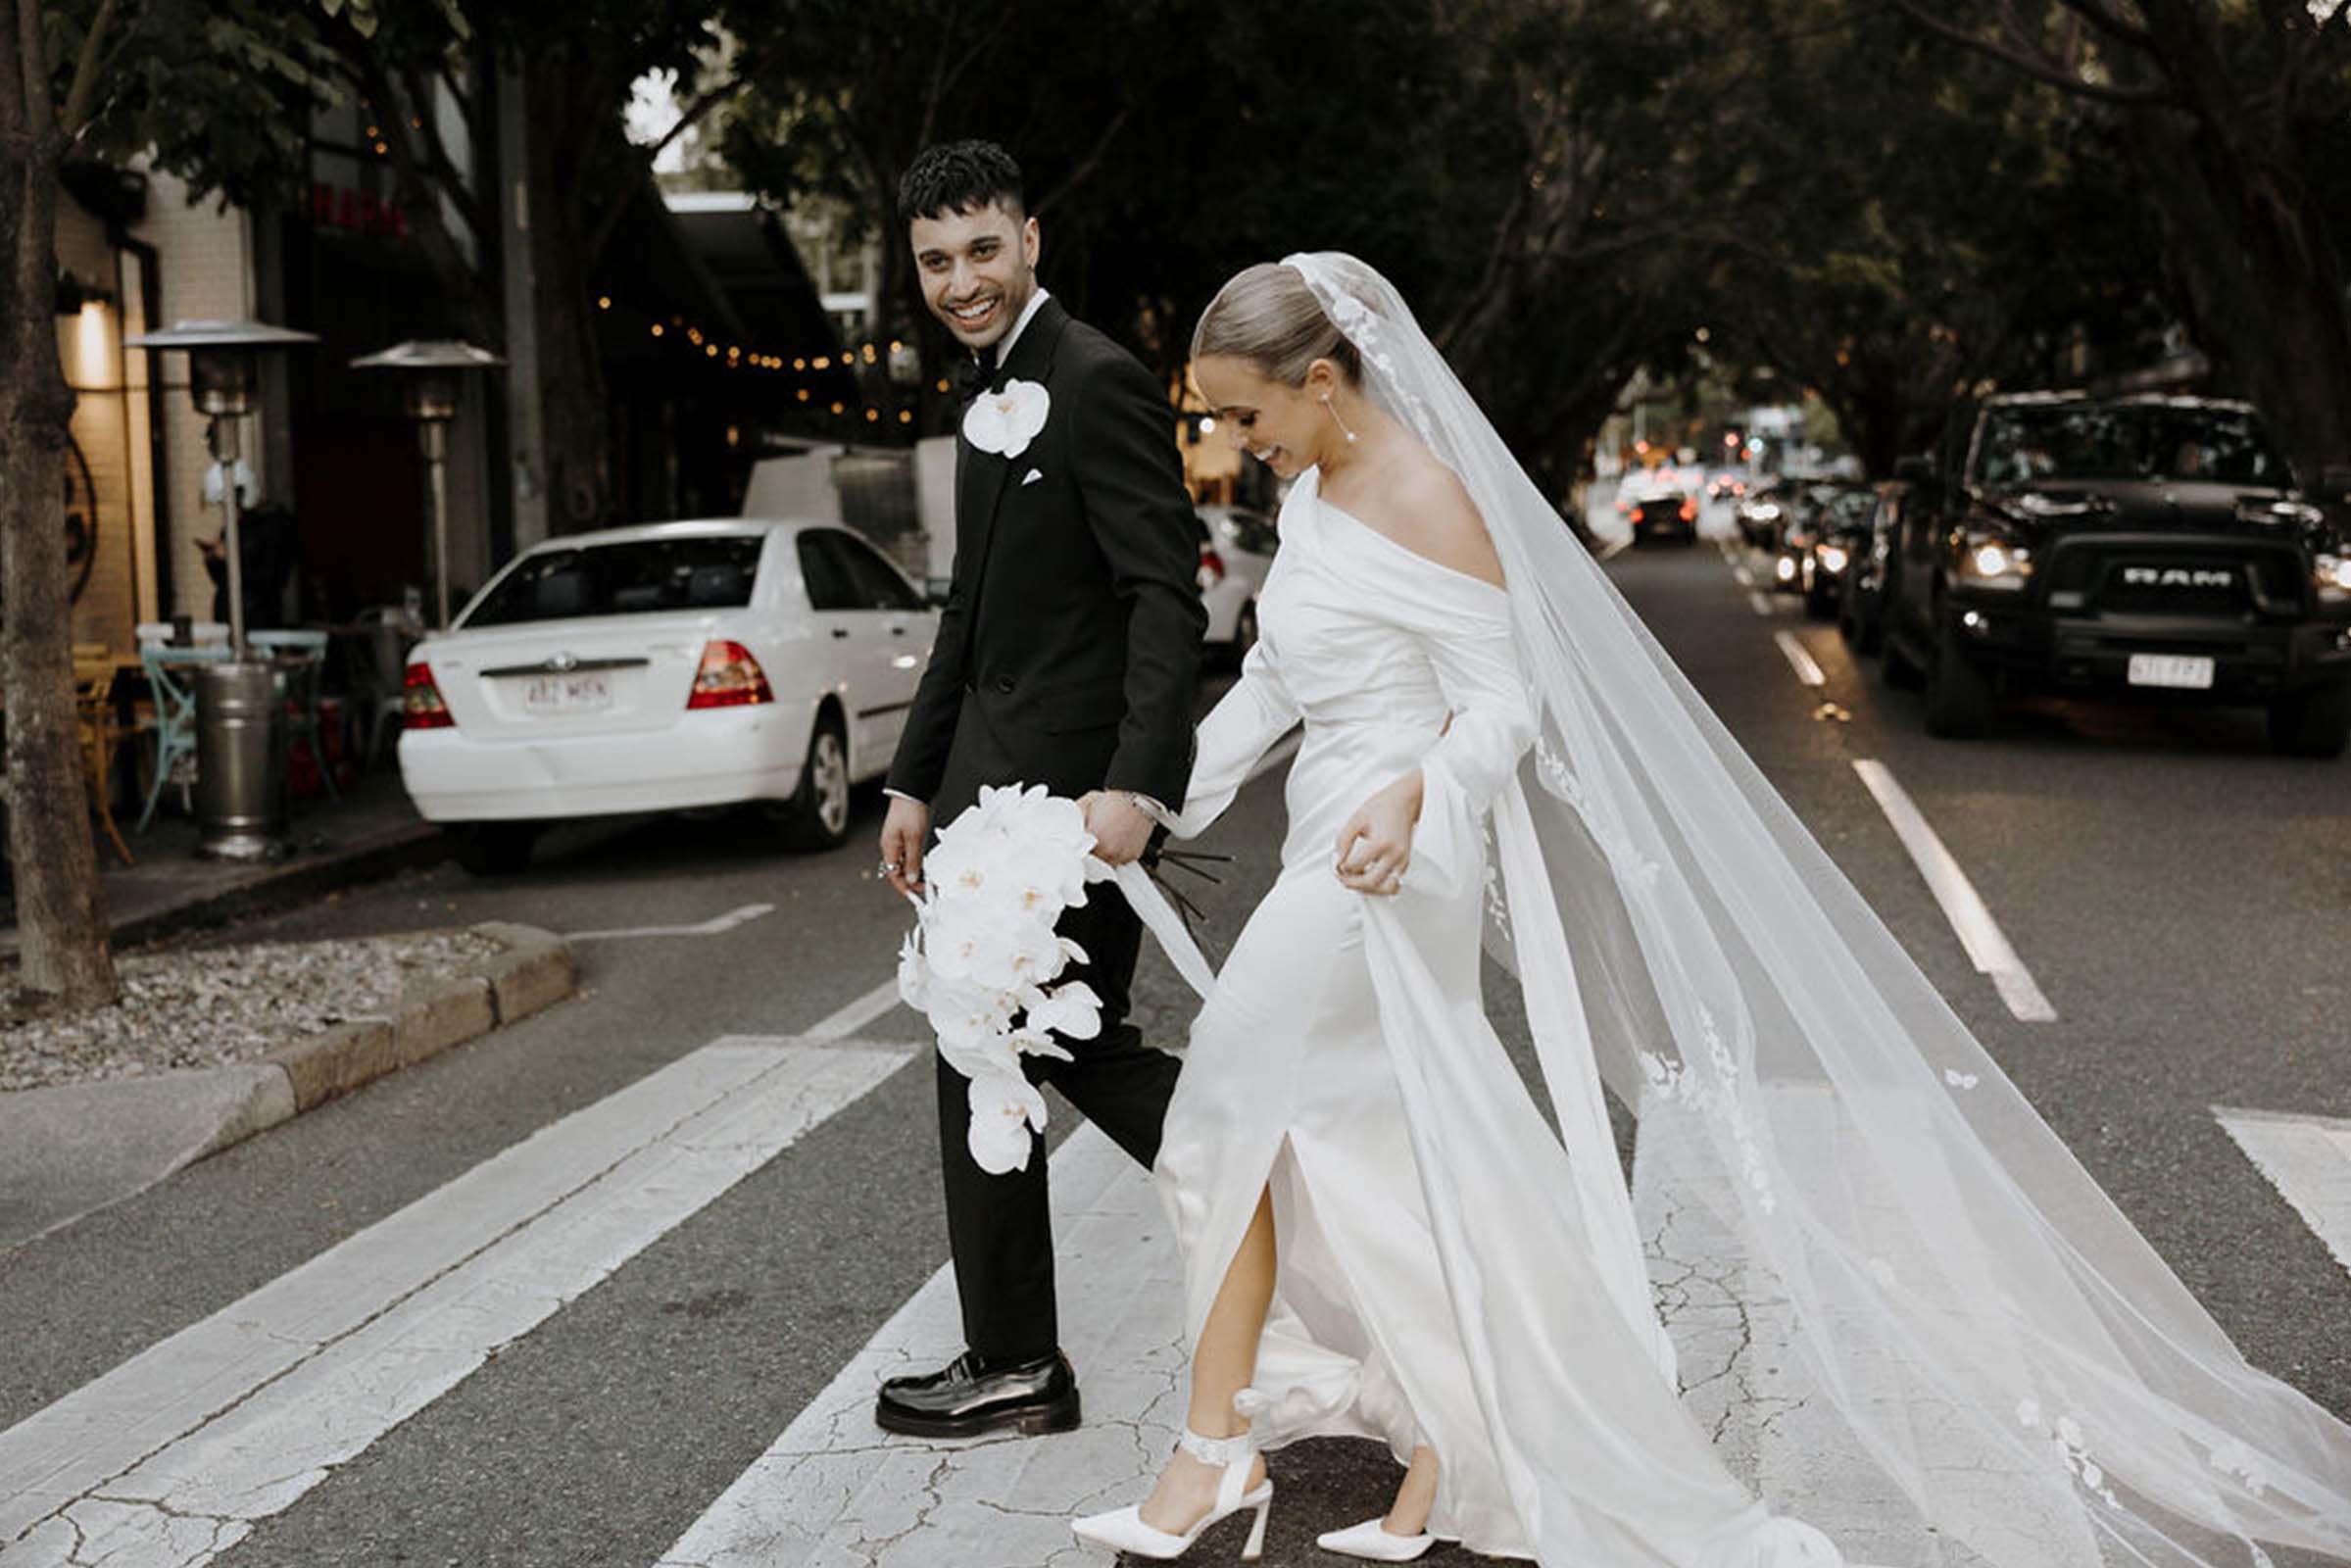 Bride and groom walking through city streets